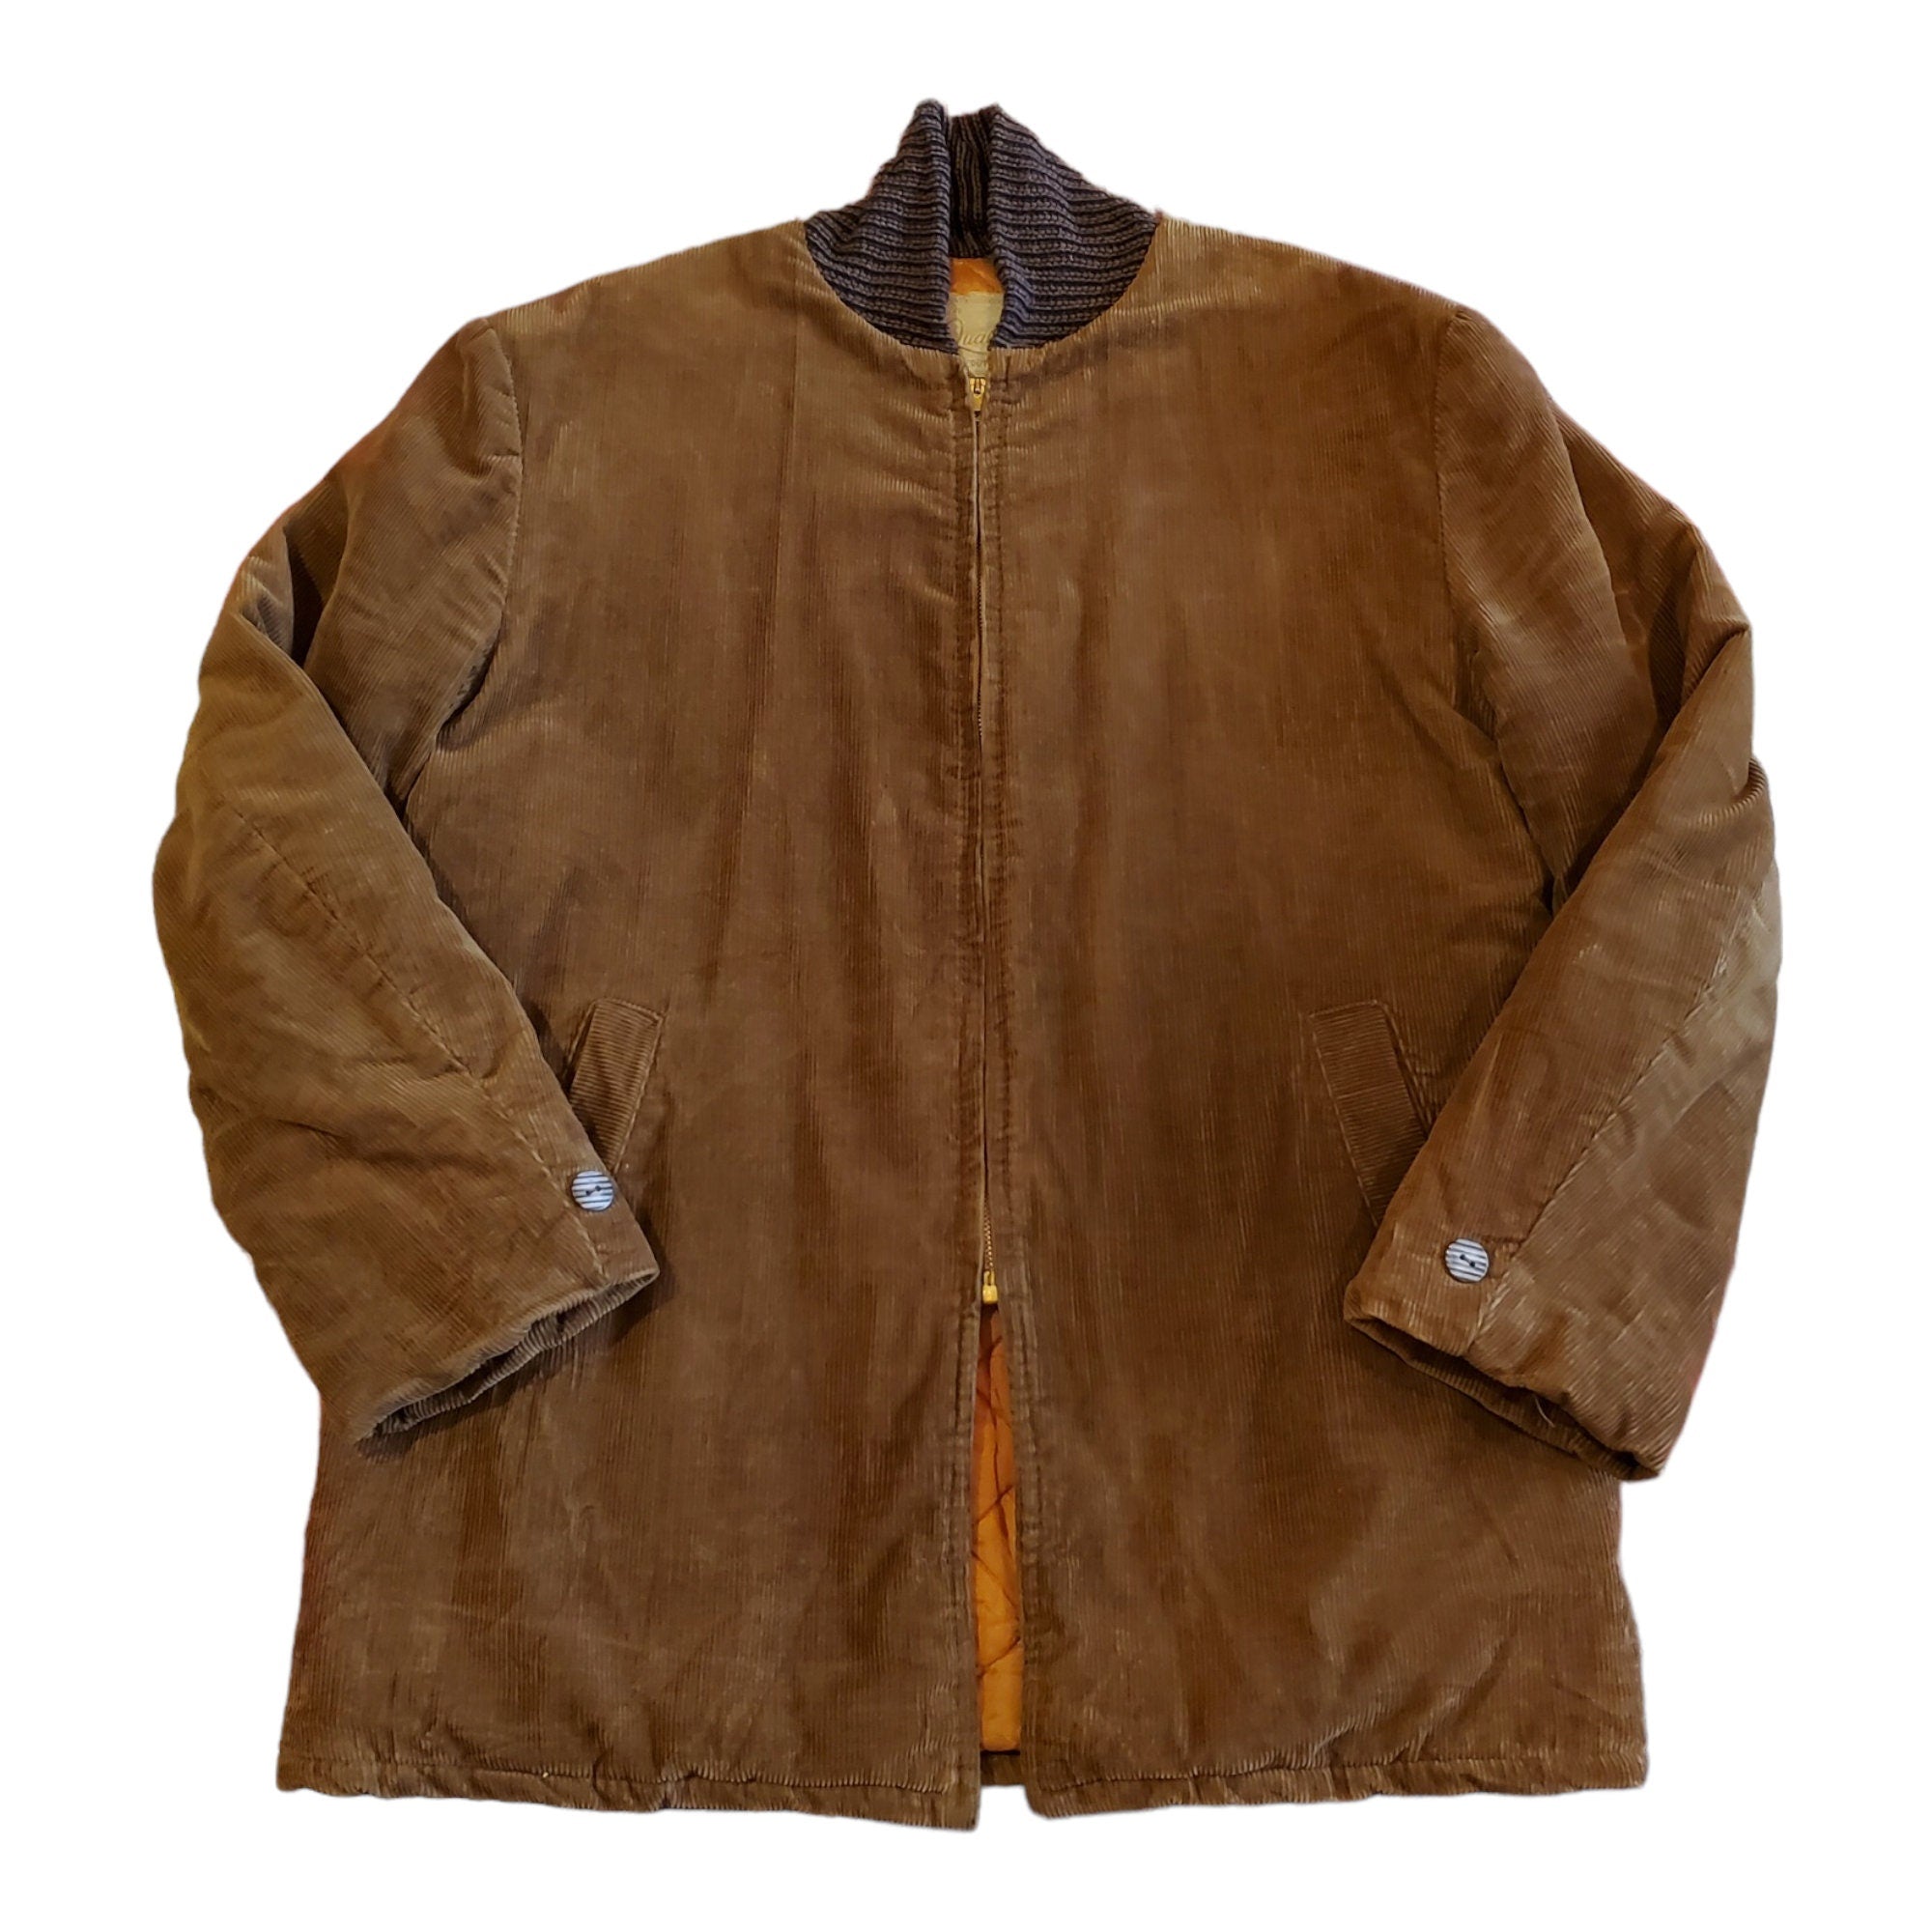 1950s/1960s Deluxe Quality Outerwear Corduroy Insulated Car Coat